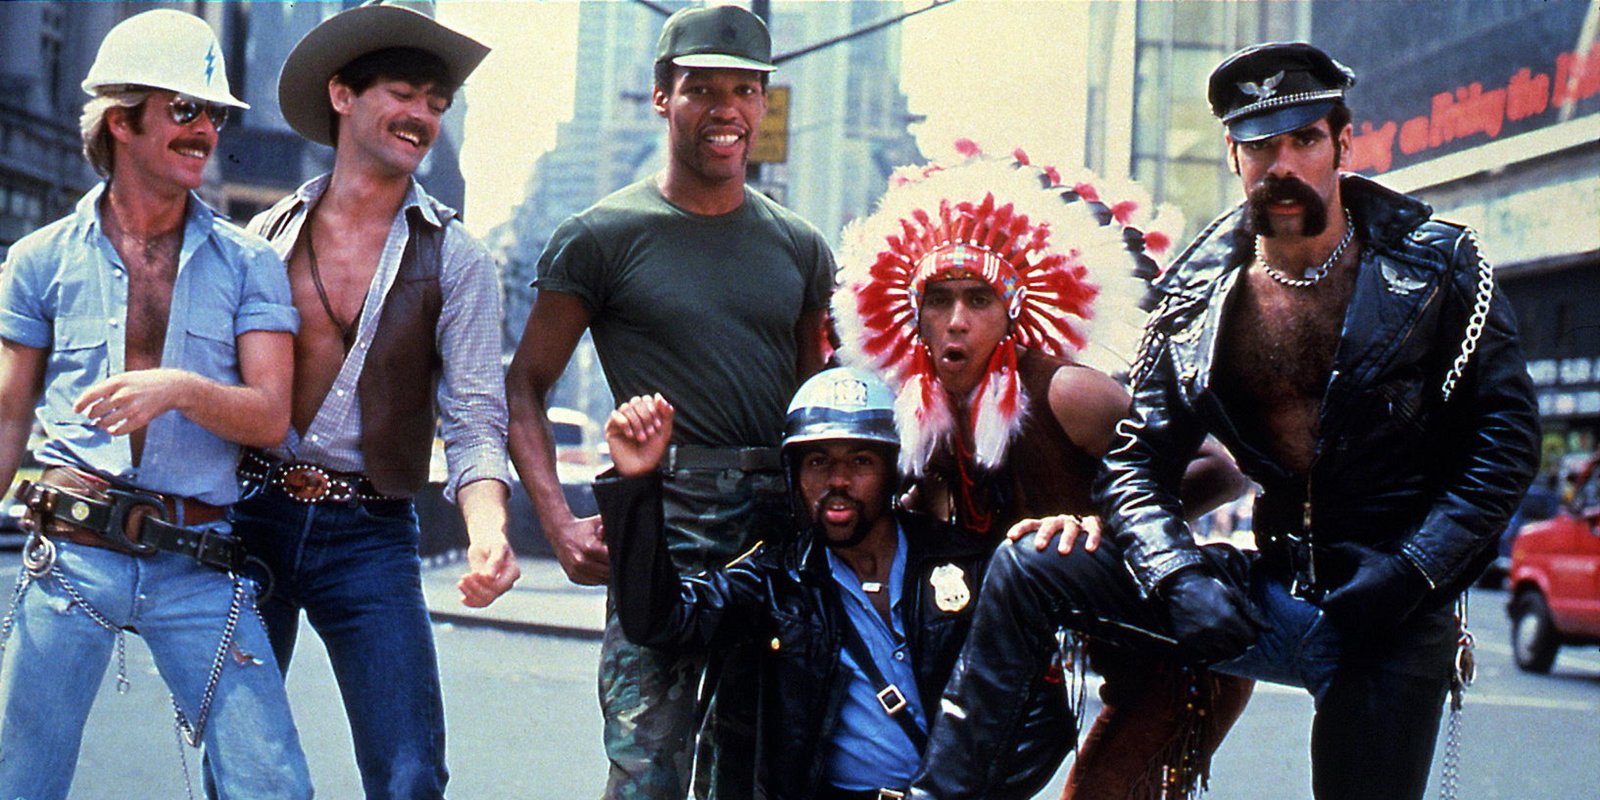 The Village People - Can't Stop the Music